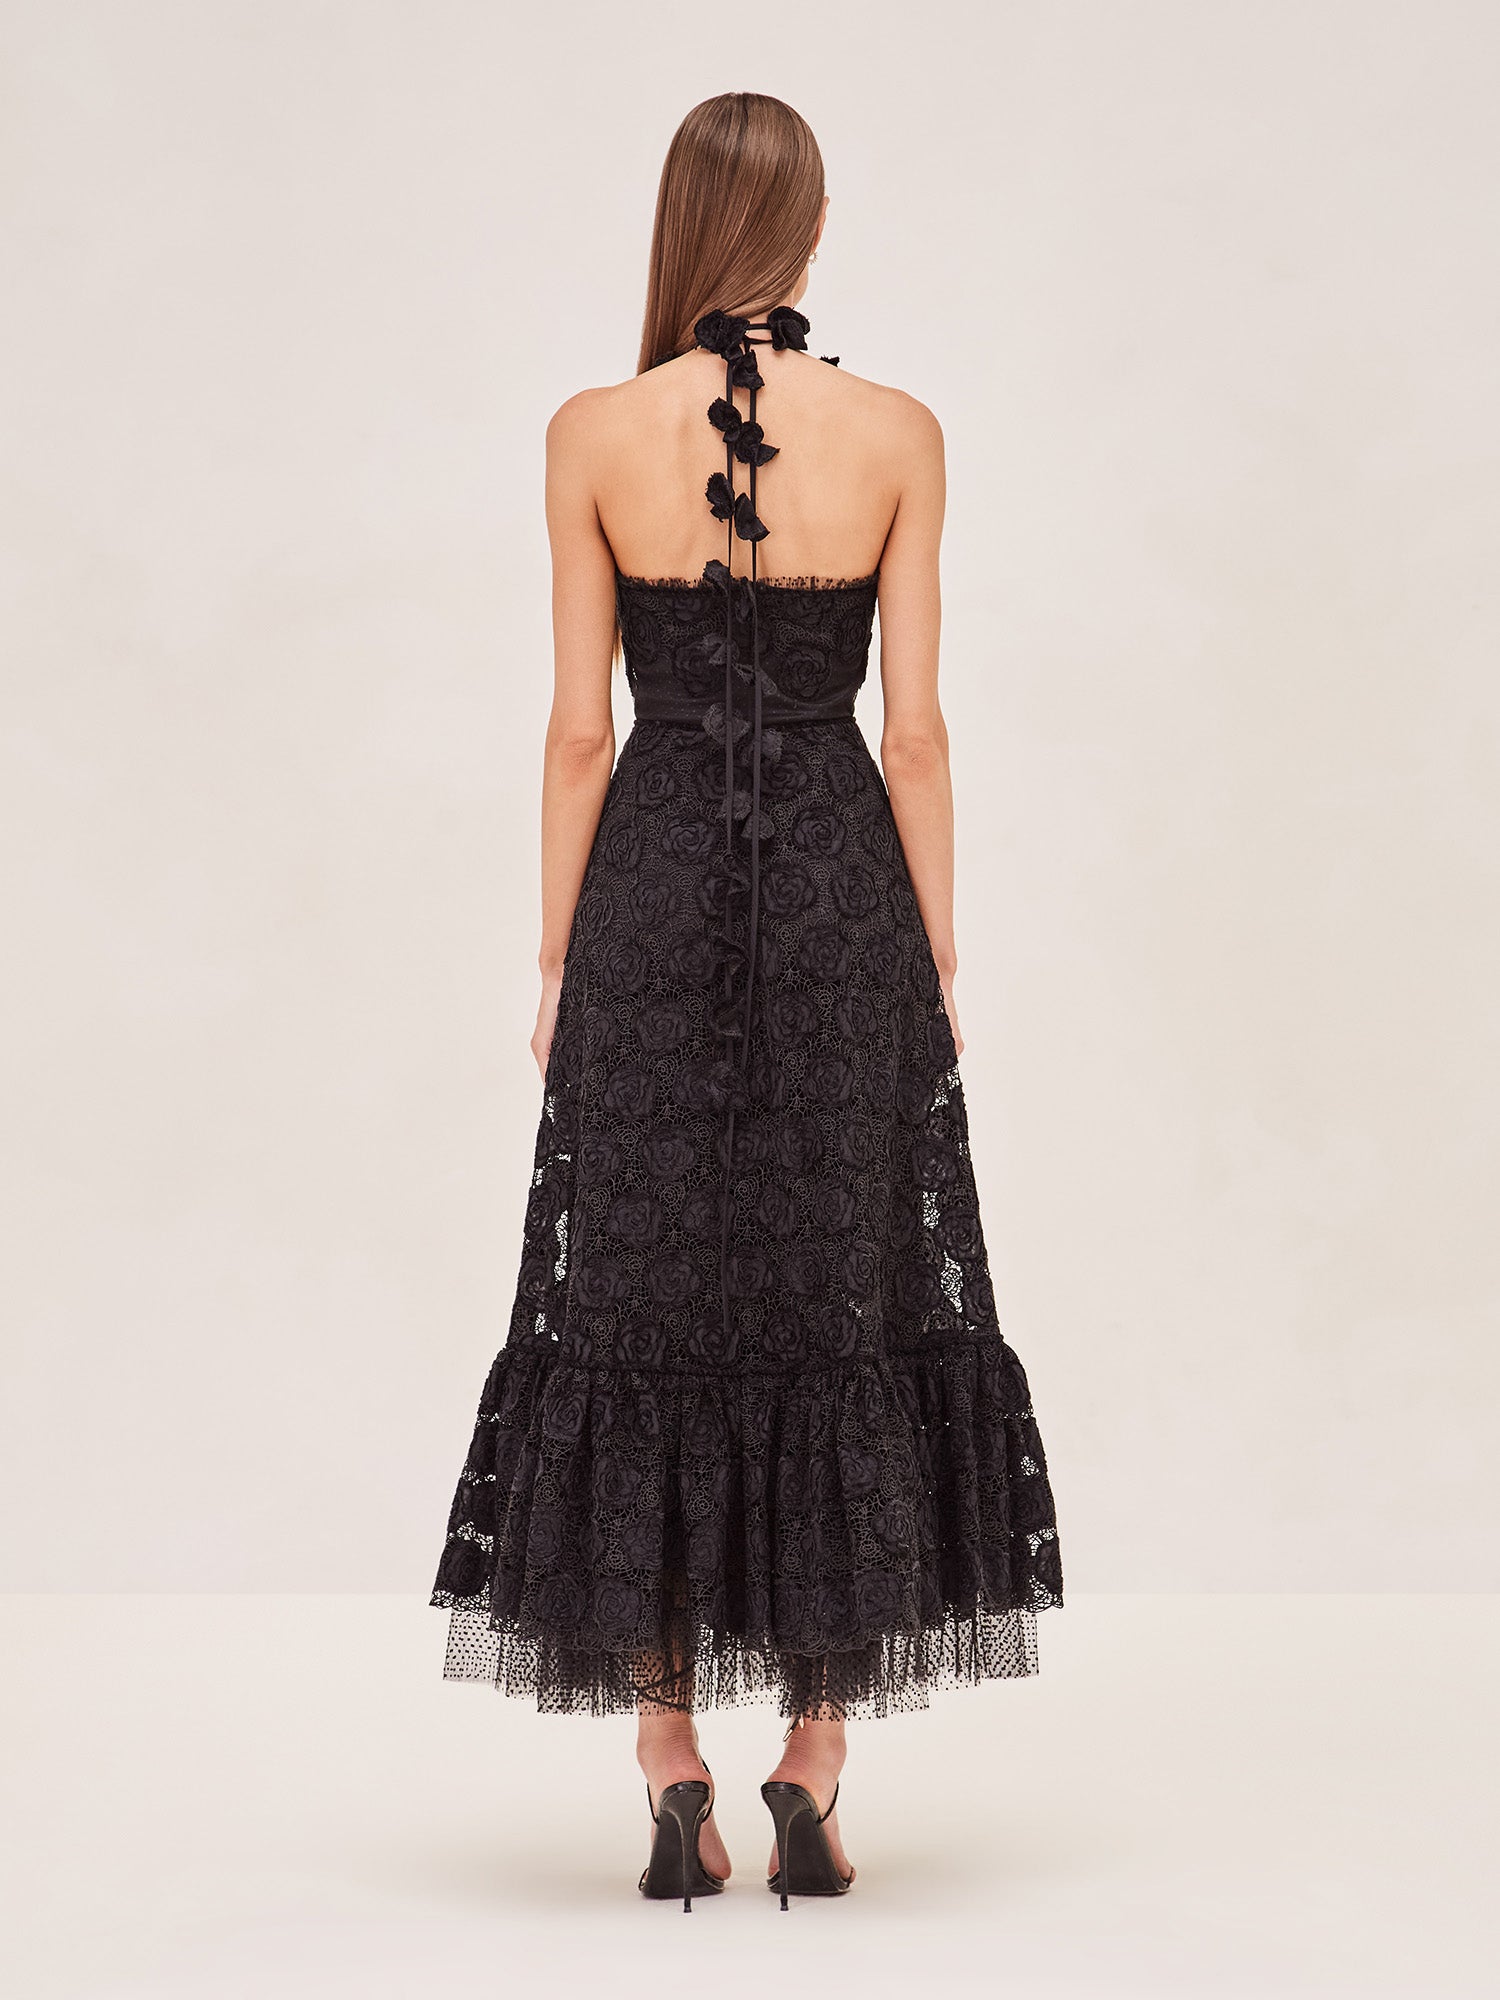 Alexis black lace midi dress with floral patterns and halter neck and removable skirt lining.